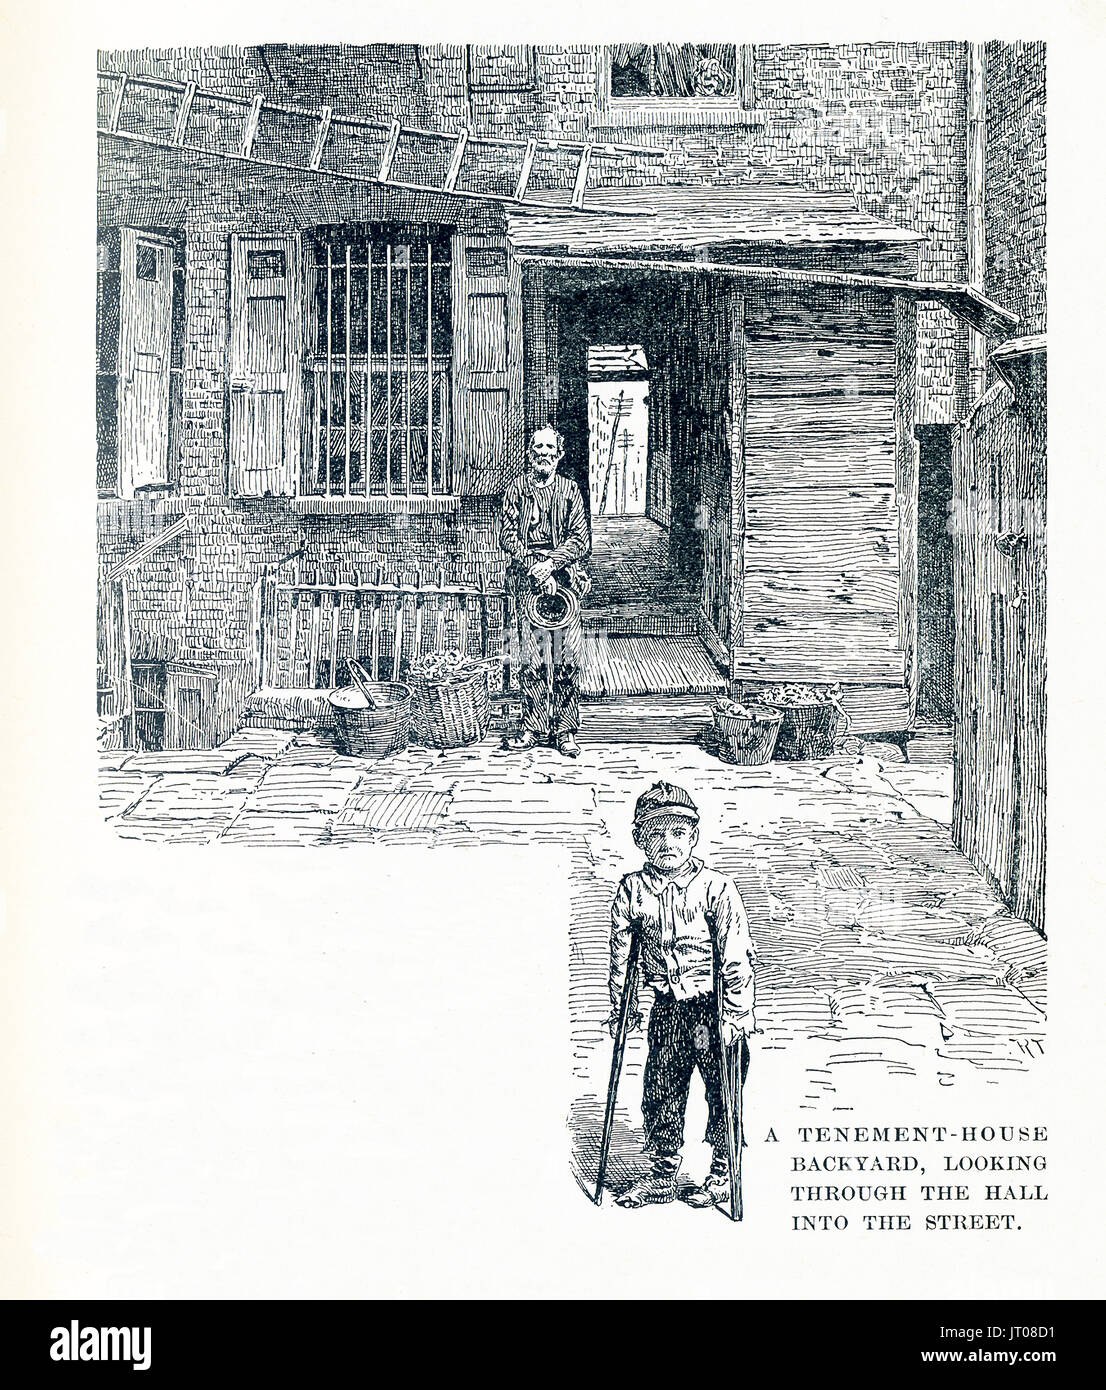 This late 19the-century illustration showsa tenement house backyard, looking through the hall into the street. In 1872 businessman Frederick Hatch bought the property in Lower Manhattan that became the Water Street Mission. He had met Jerry McAuley and put him in charge of this new venture - America's first Rescue Mission. Stock Photo